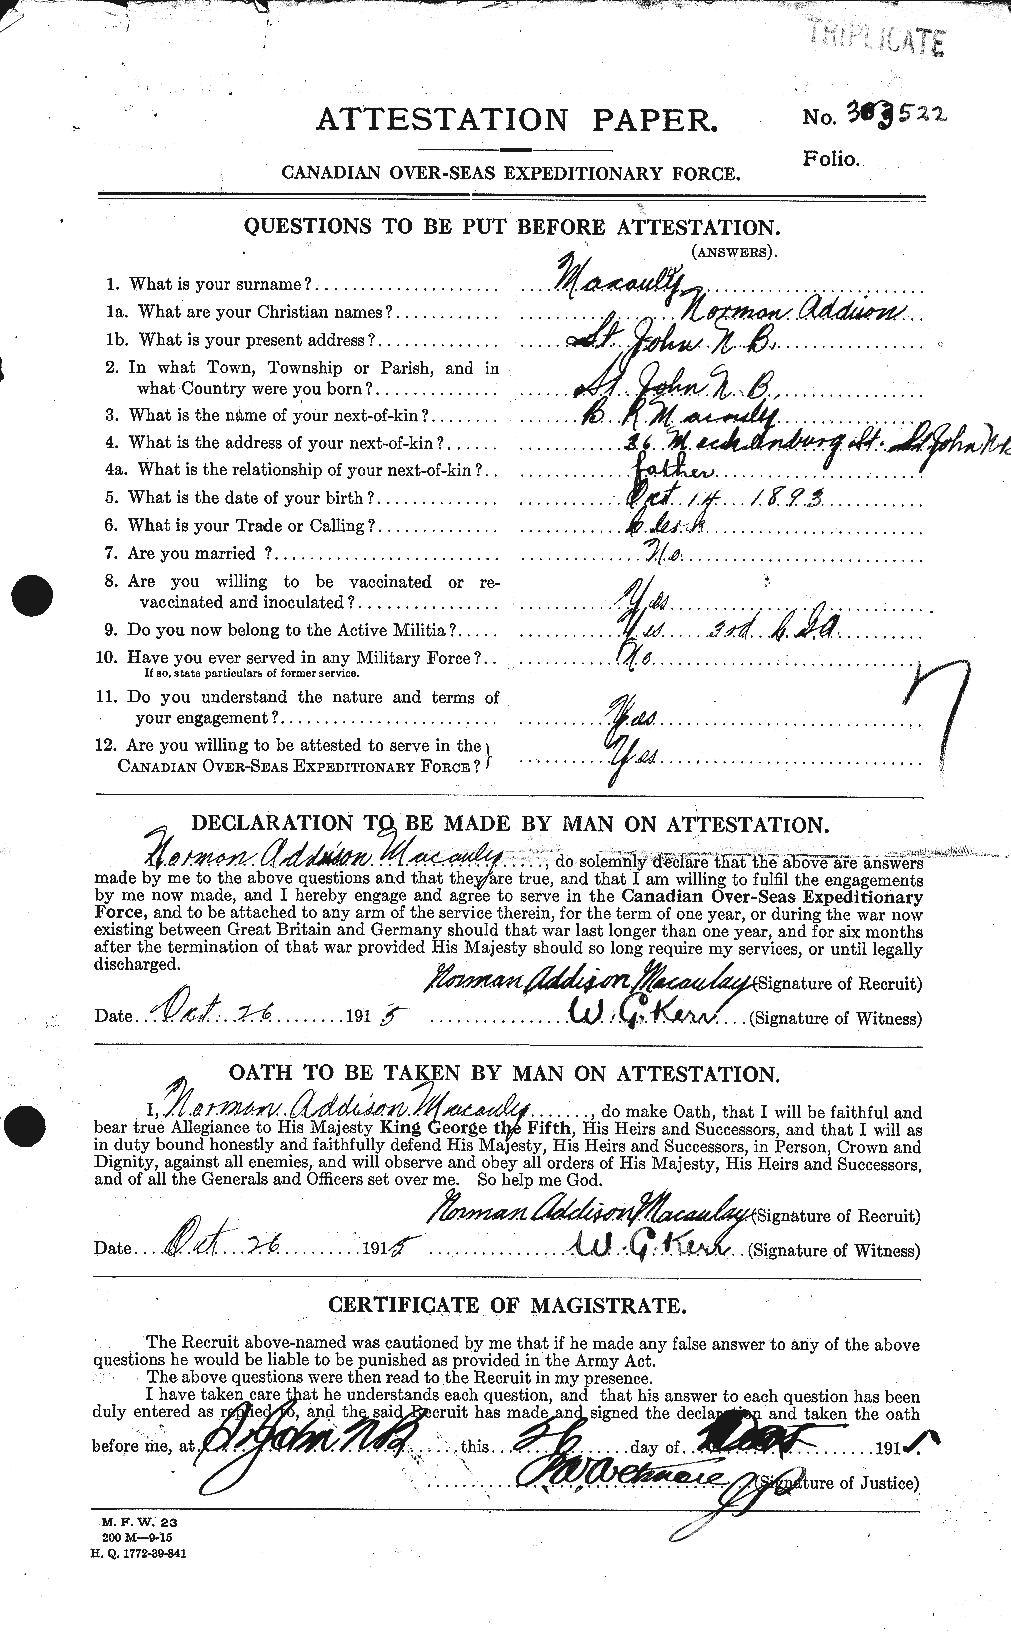 Personnel Records of the First World War - CEF 130750a